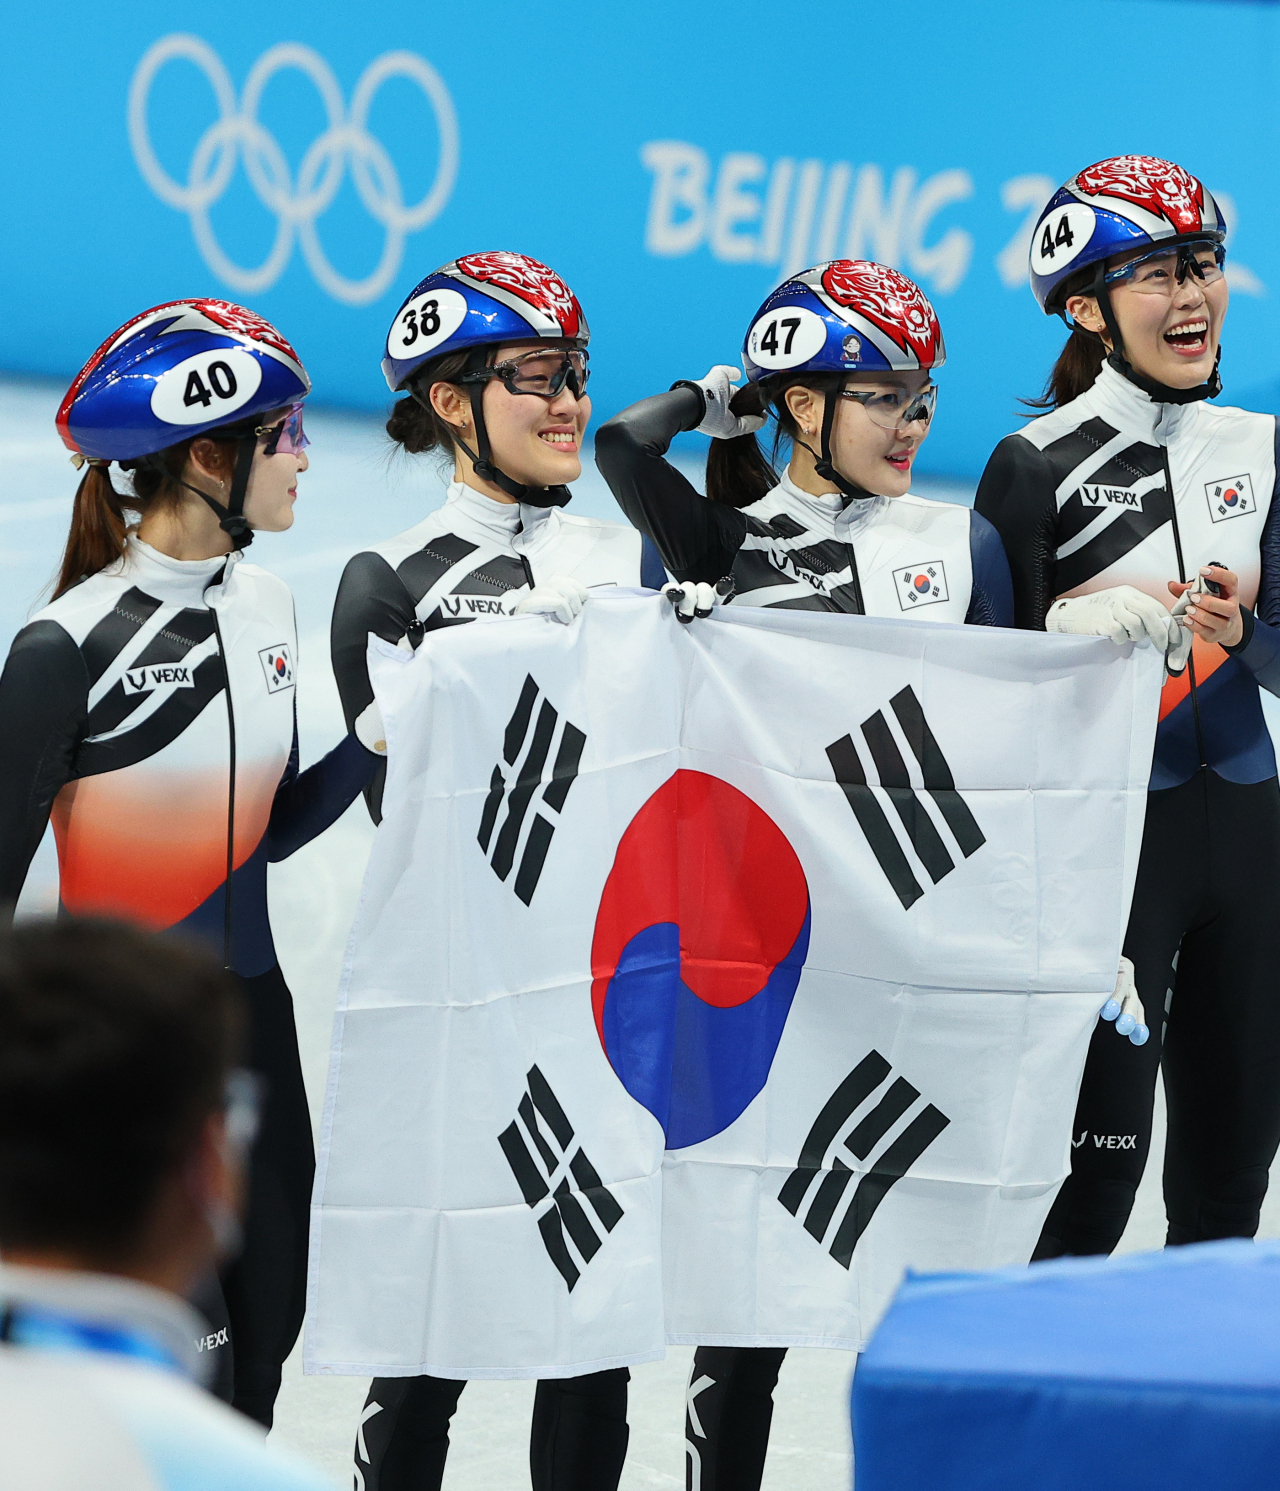 South Korean short track speed skaters Choi Min-jeong, Kim A-lang, Lee Yu-bin and Seo Whi-min celebrate their silver medal in the women's 3,000m relay at the Beijing Winter Olympics at Capital Indoor Stadium in Beijing on Sunday. (Yonhap)